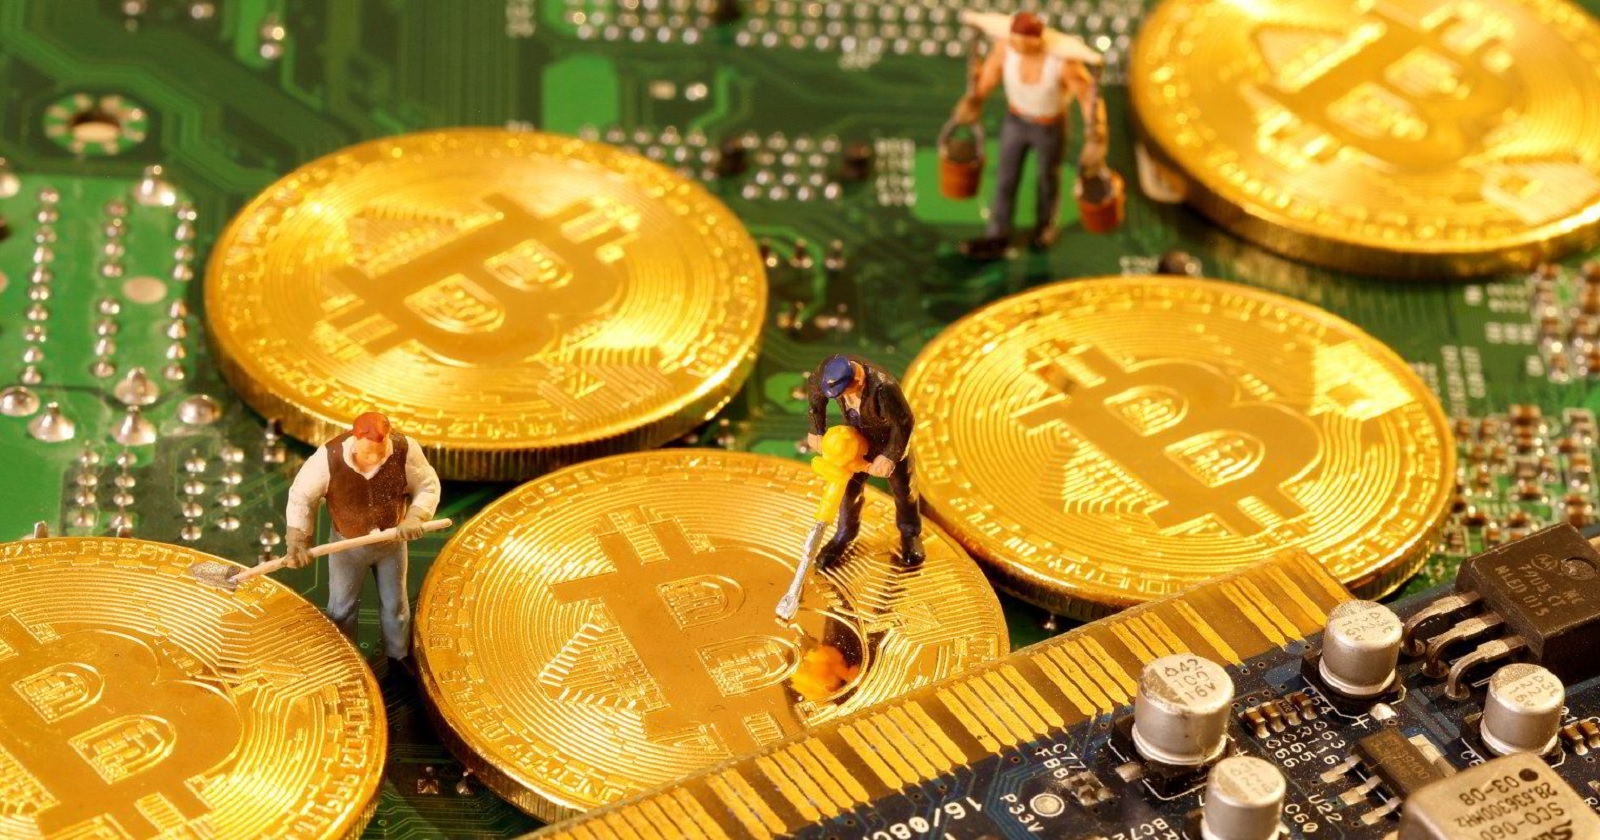 Rising energy costs put Bitcoin miners at risk of Nasdaq delisting